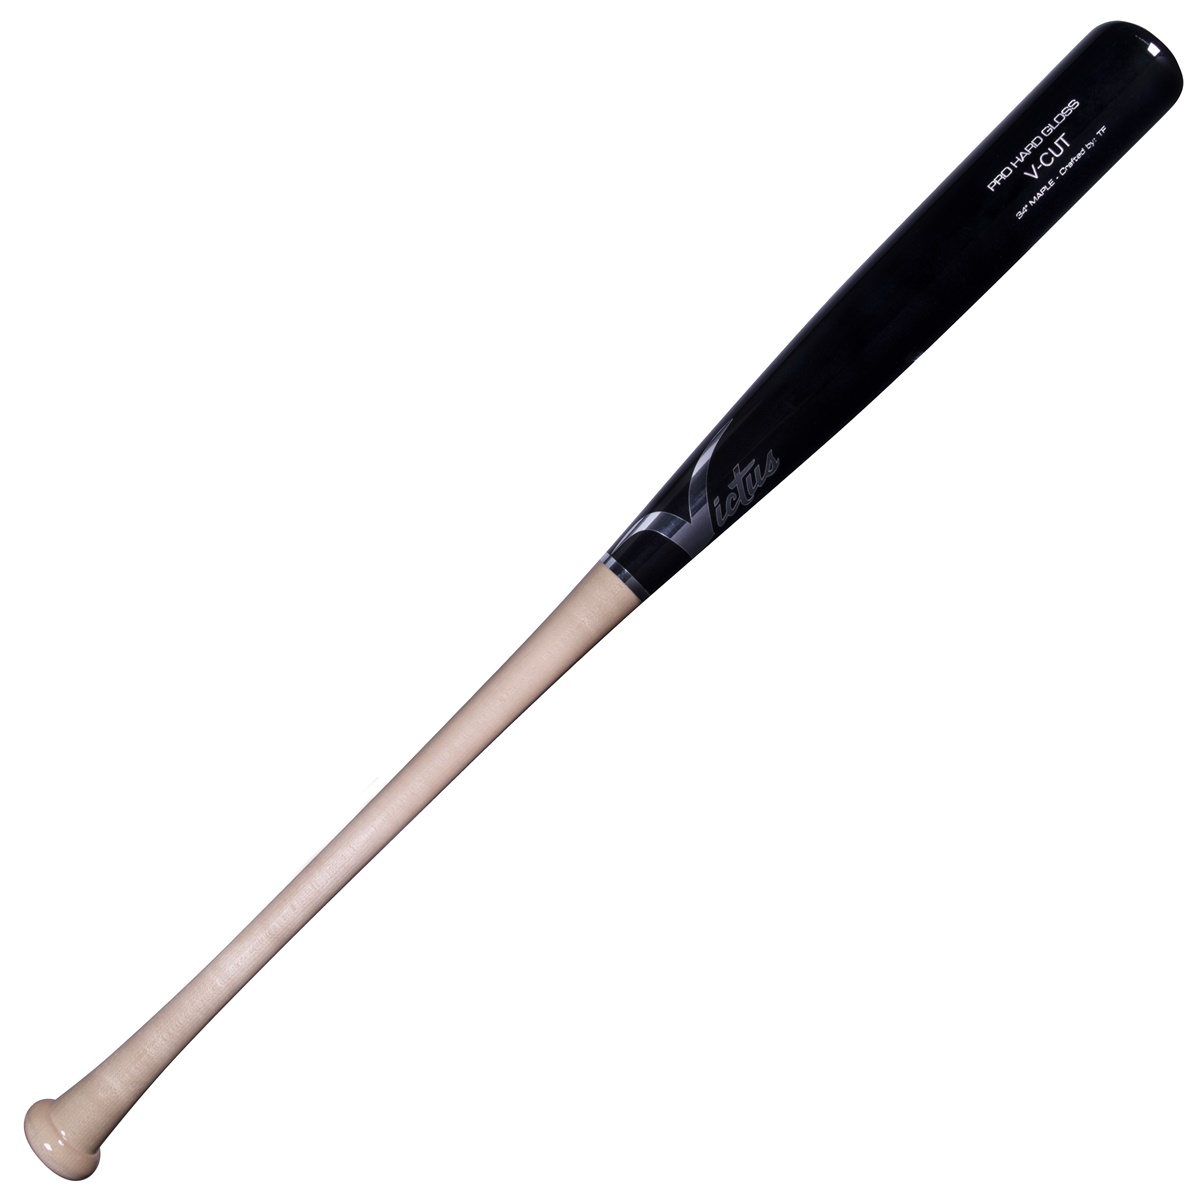 victus-v-cut-pro-cut-natural-black-gloss-wood-baseball-bat-33-inch VGPC-NBK-33 Victus 840078703362 V-Cuts were destined for the pros with the same quality wood